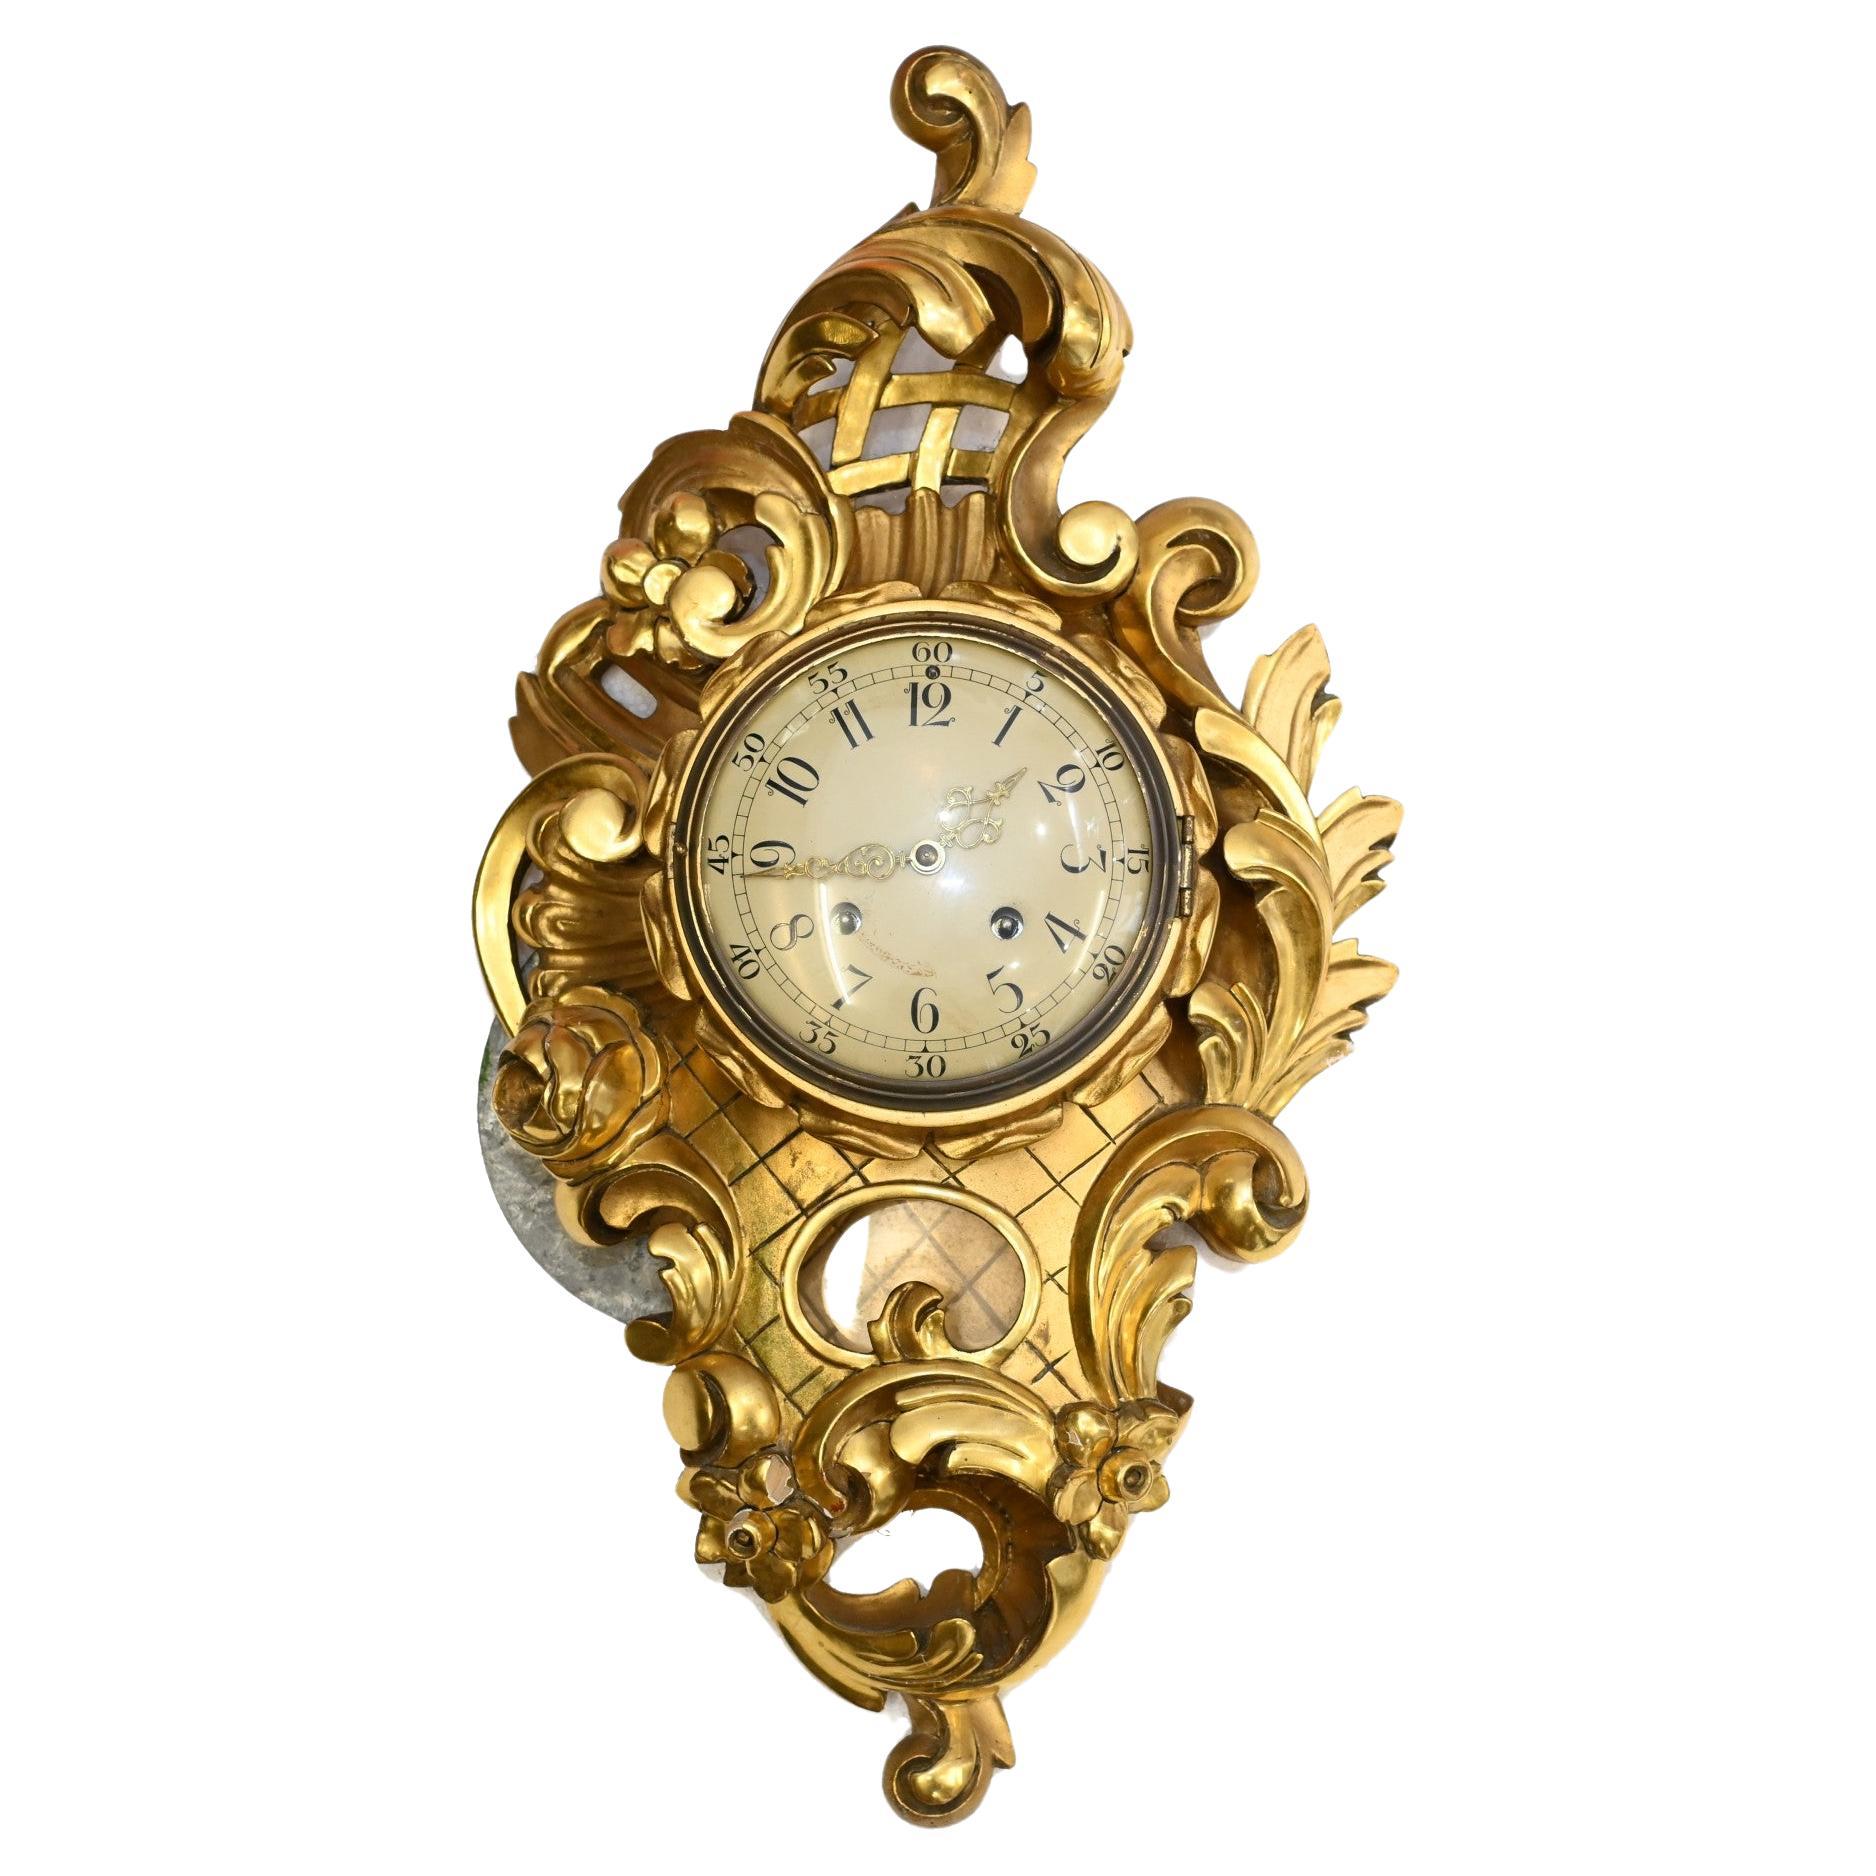 Scandanavian Wall Clock Antique Carved Rococo Giltwood Clocks For Sale